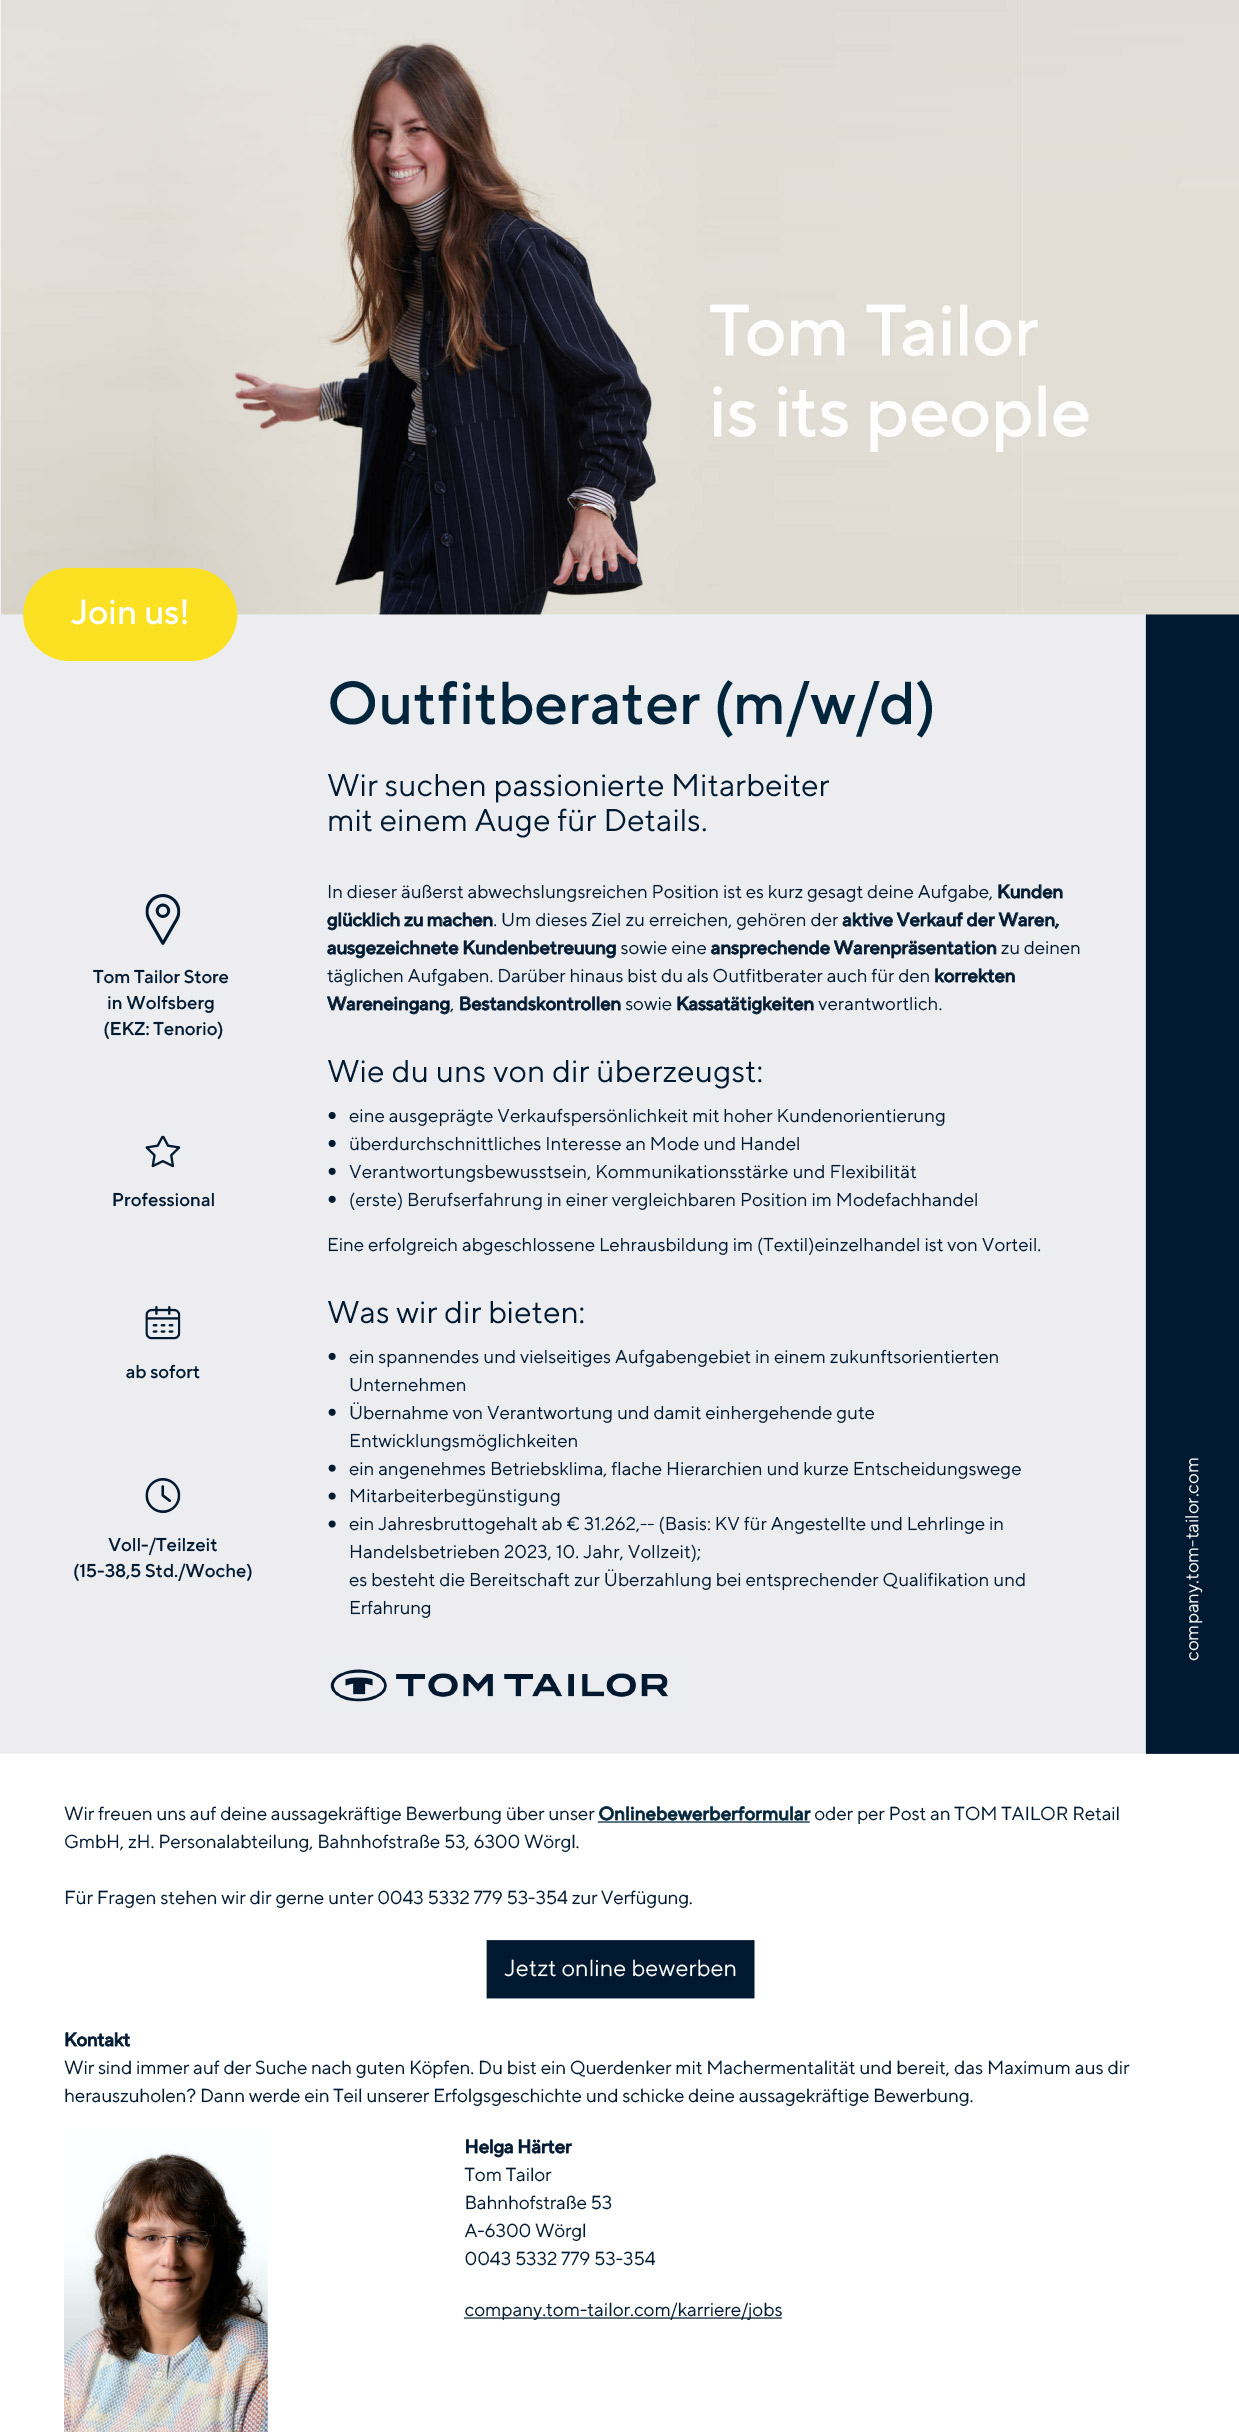 Tom Tailor Outfitberater